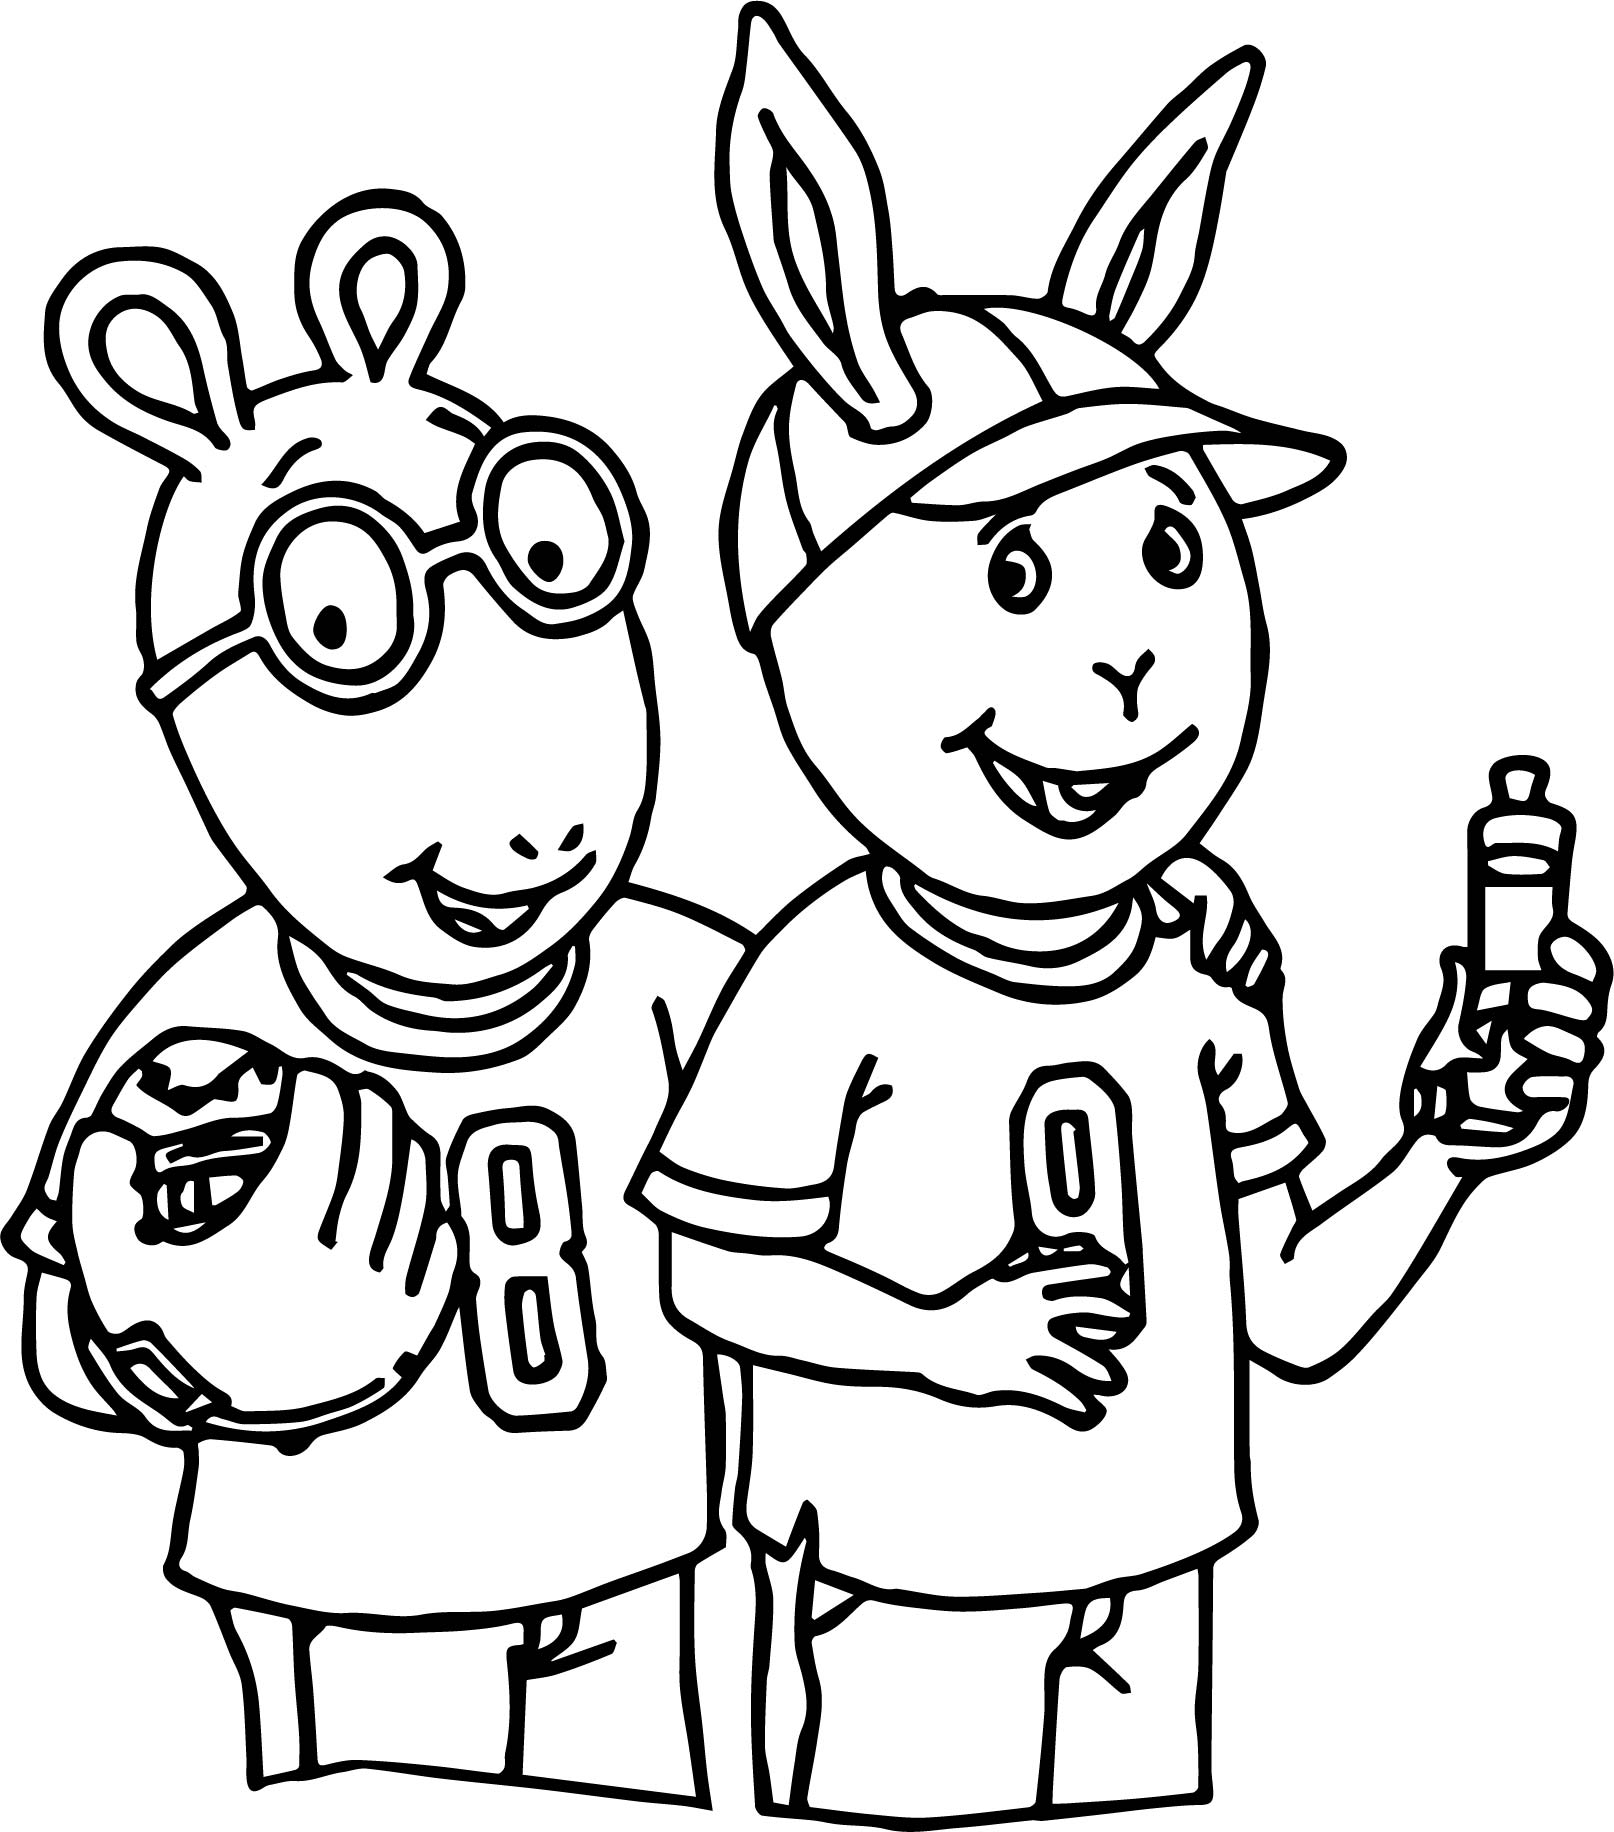 Asthma Home Coloring Page - Wecoloringpage.com